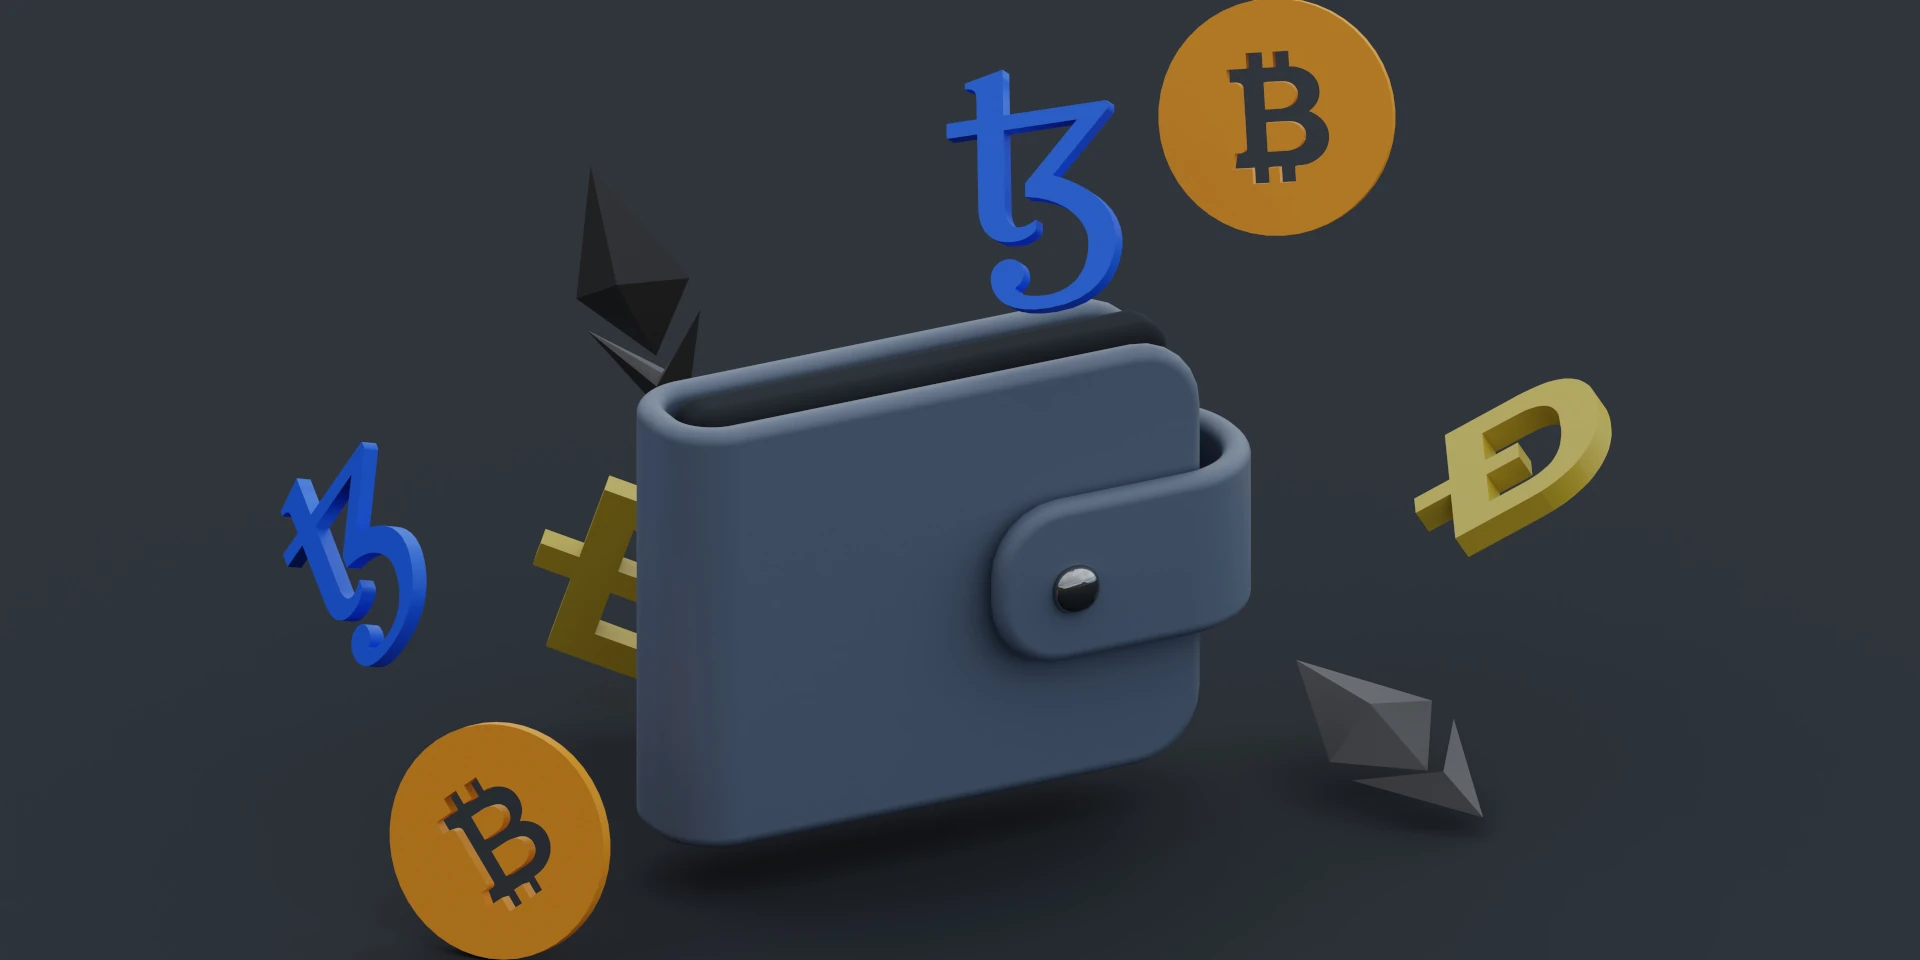 Cryptocurrency icons with digital illustration of a waller